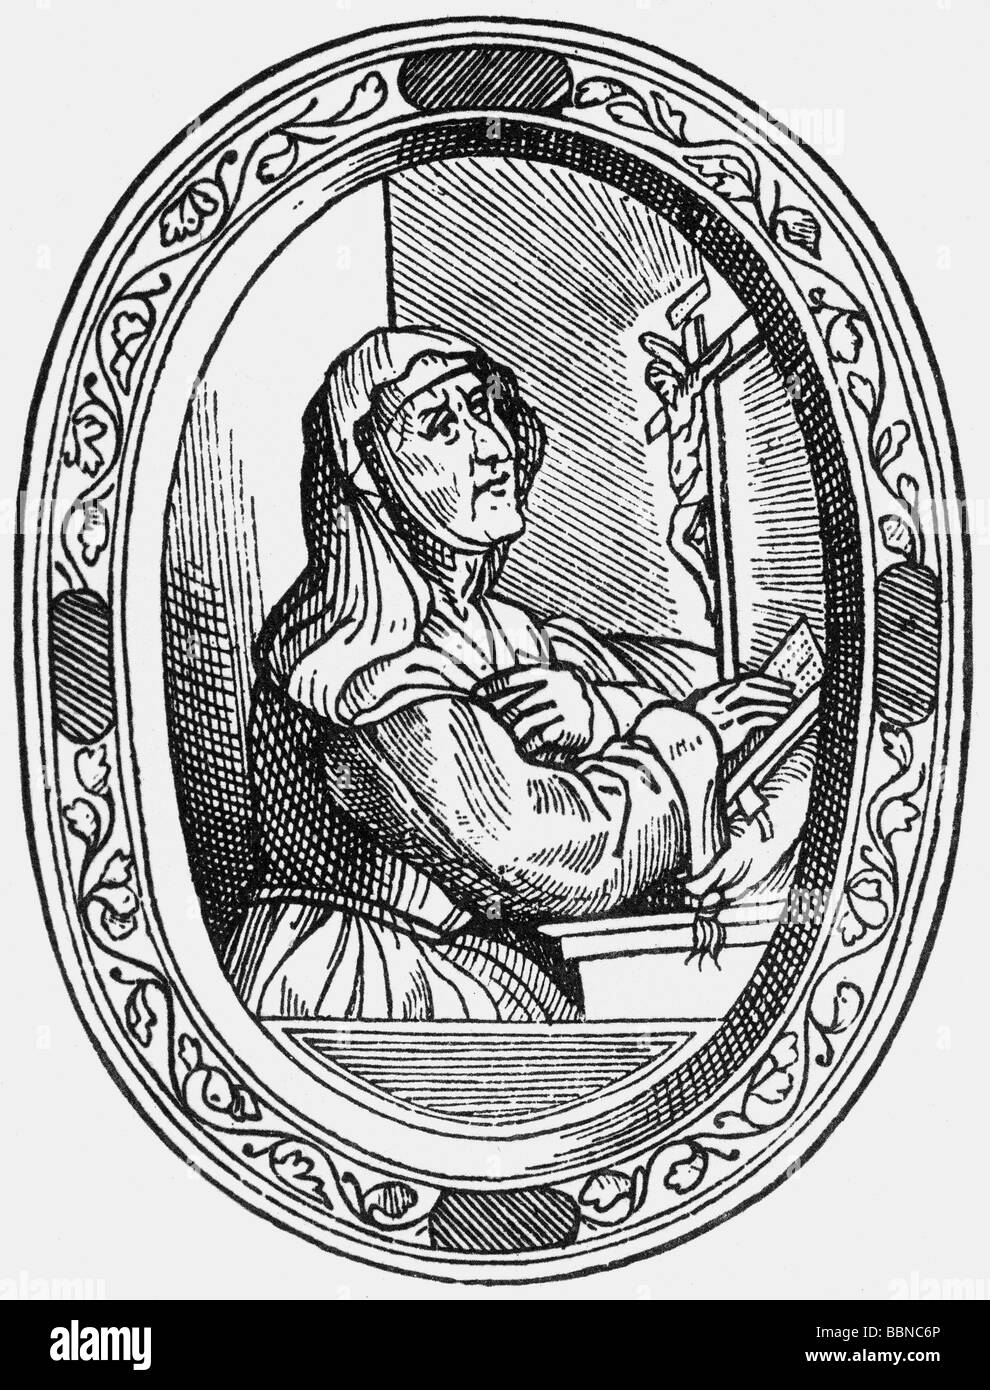 Colonna, Vittoria, 1492 - 25.2.1547, Marchioness of Pesaro, Italian author / writer (poet), as nun, woodcut by anonymous, to the edition of 'Rime', Venice, 1540, Stock Photo